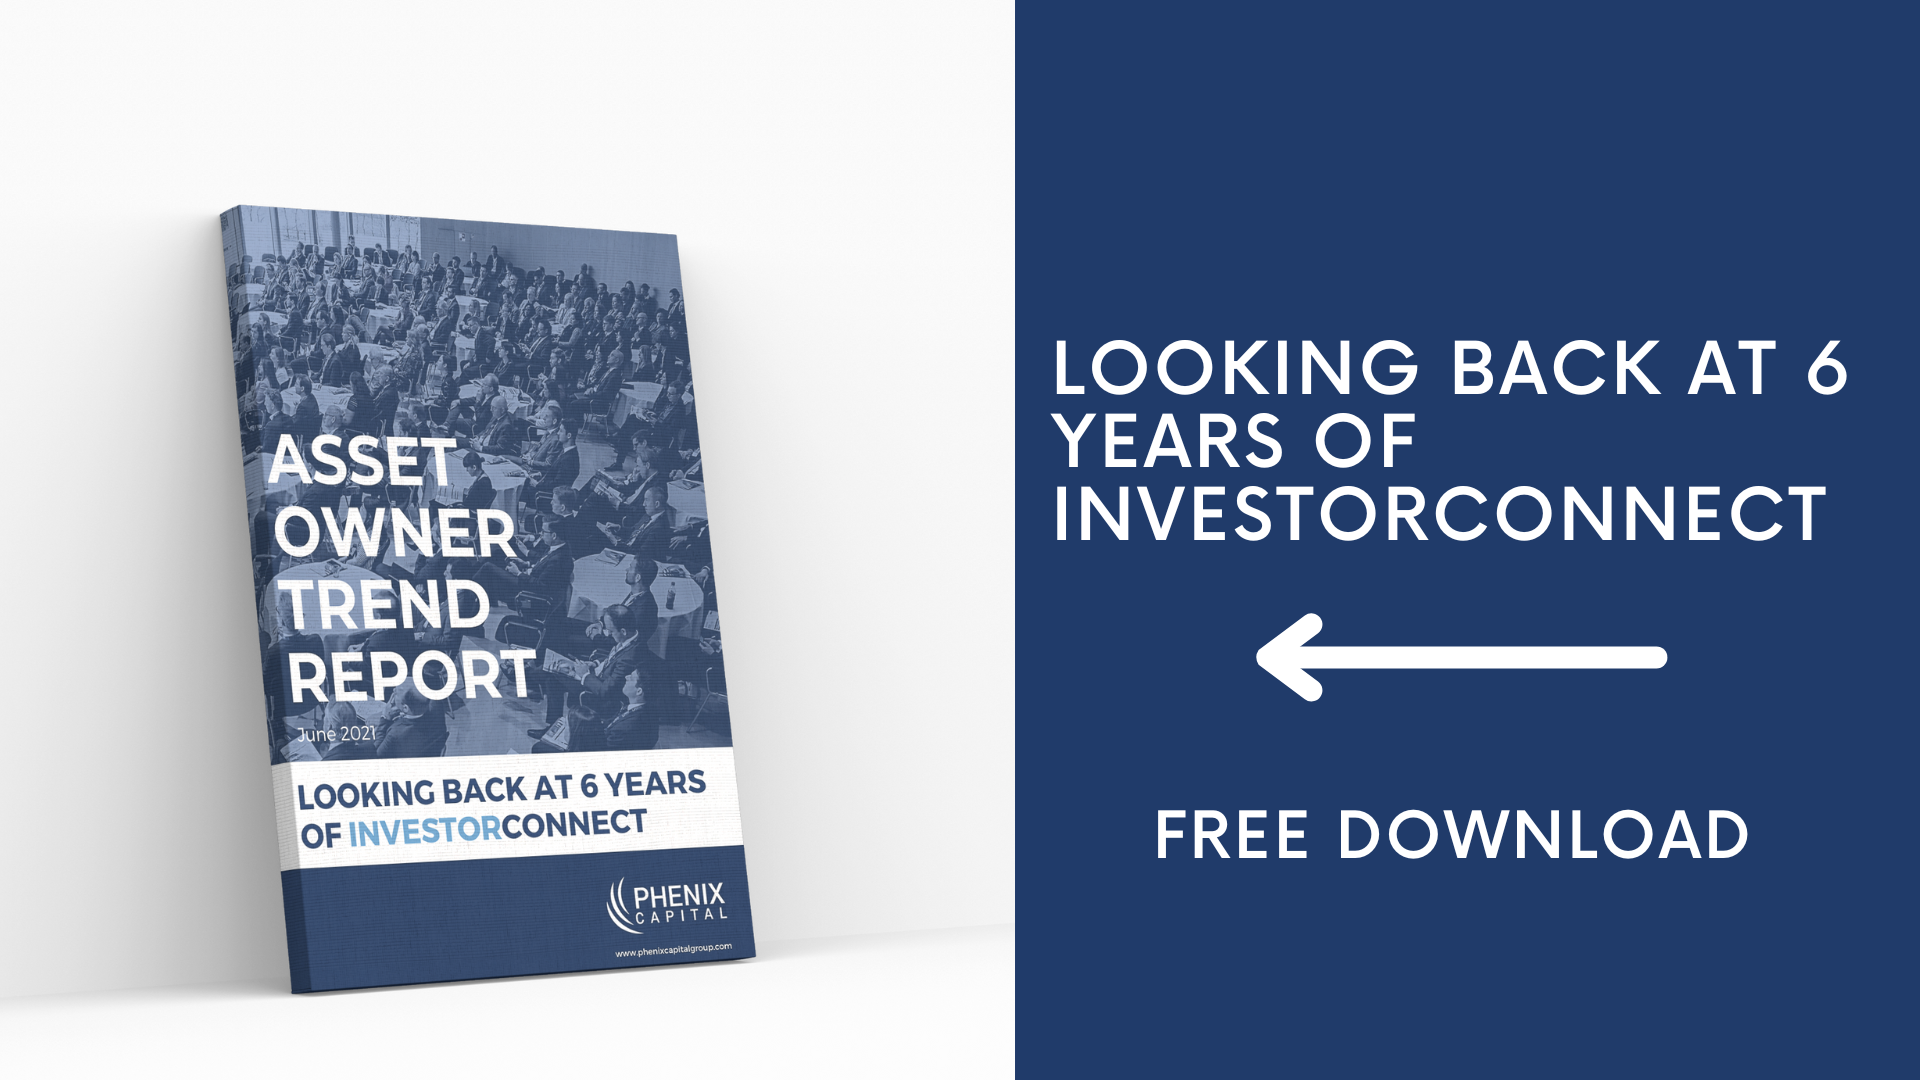 PRESS RELEASE: Asset Owner Trend Report: Looking Back at 6 Years of InvestorConnect